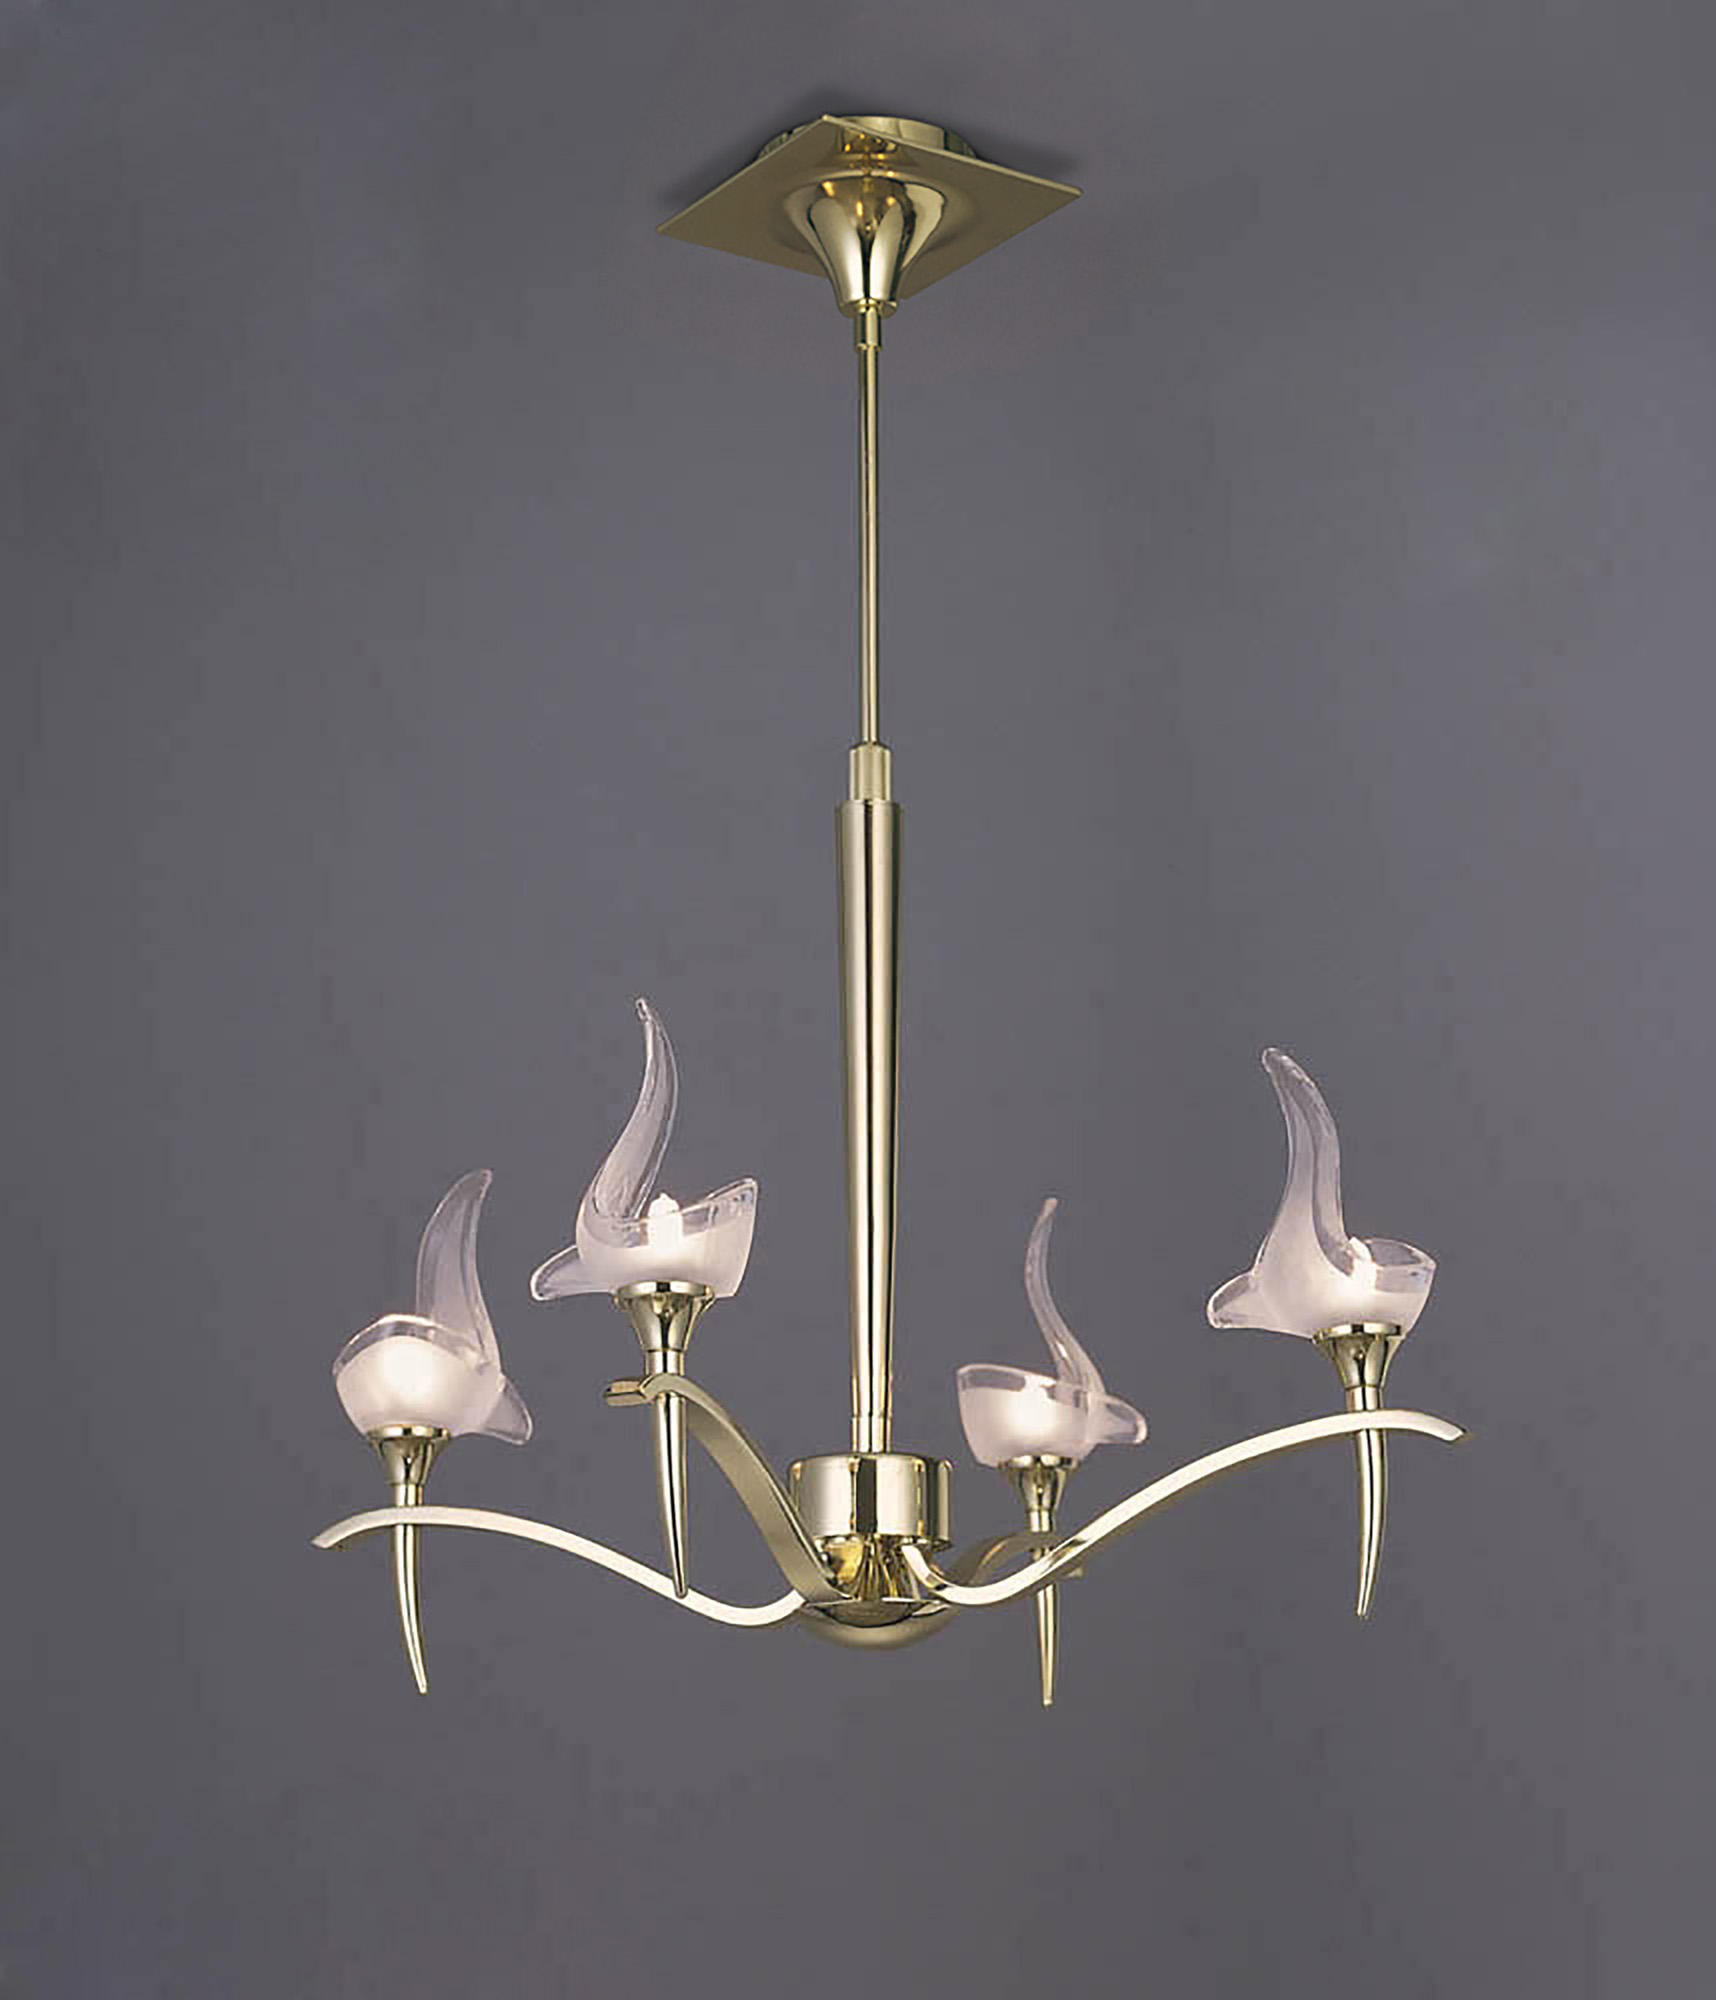 Viena Polished Brass Ceiling Lights Mantra Multi Arm Fittings